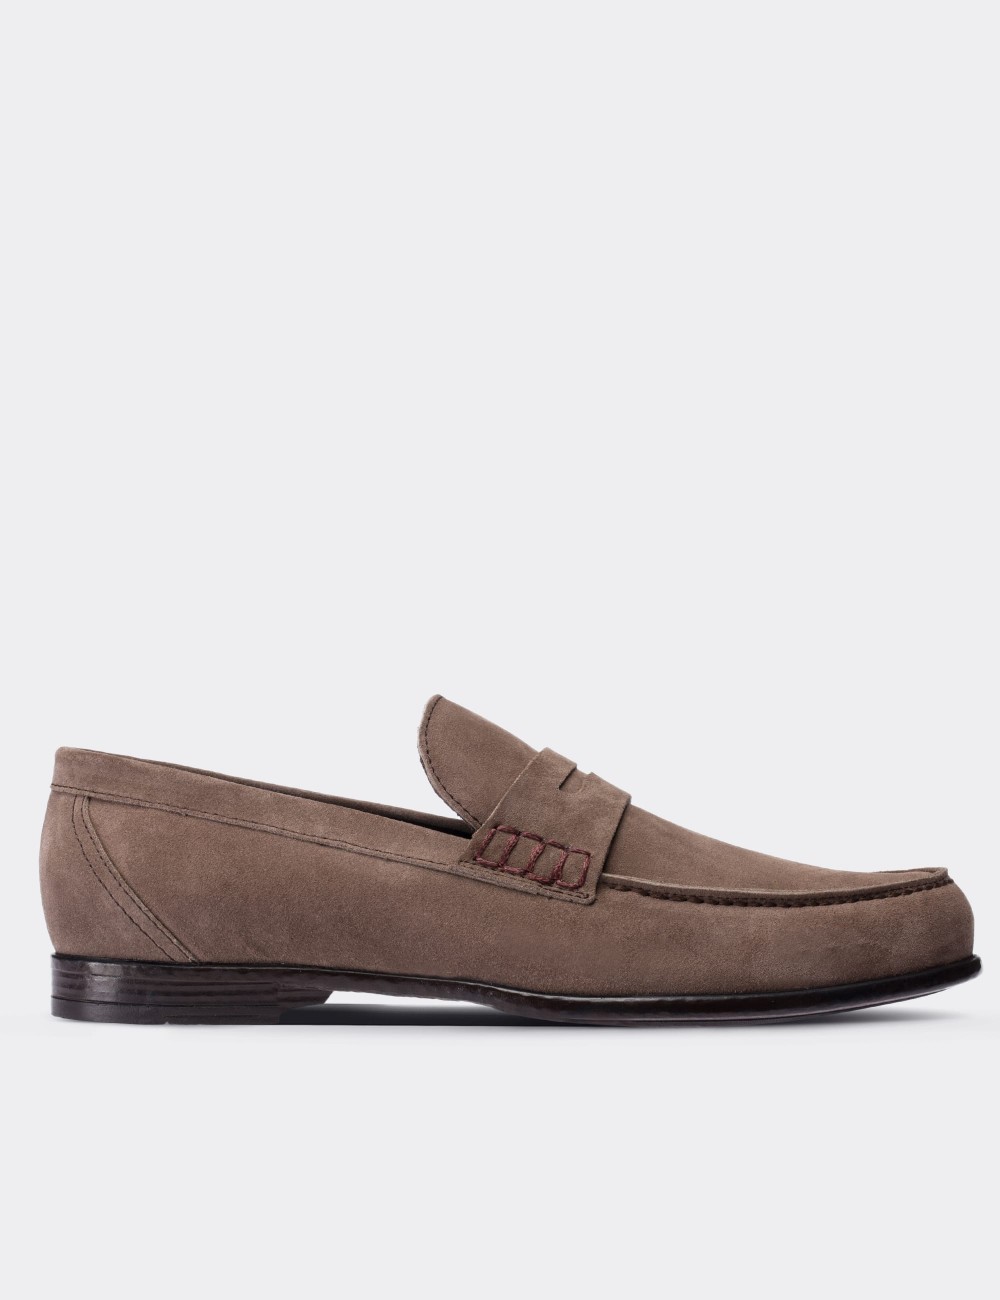 Sandstone Suede Leather Loafers - 01538MVZNC01